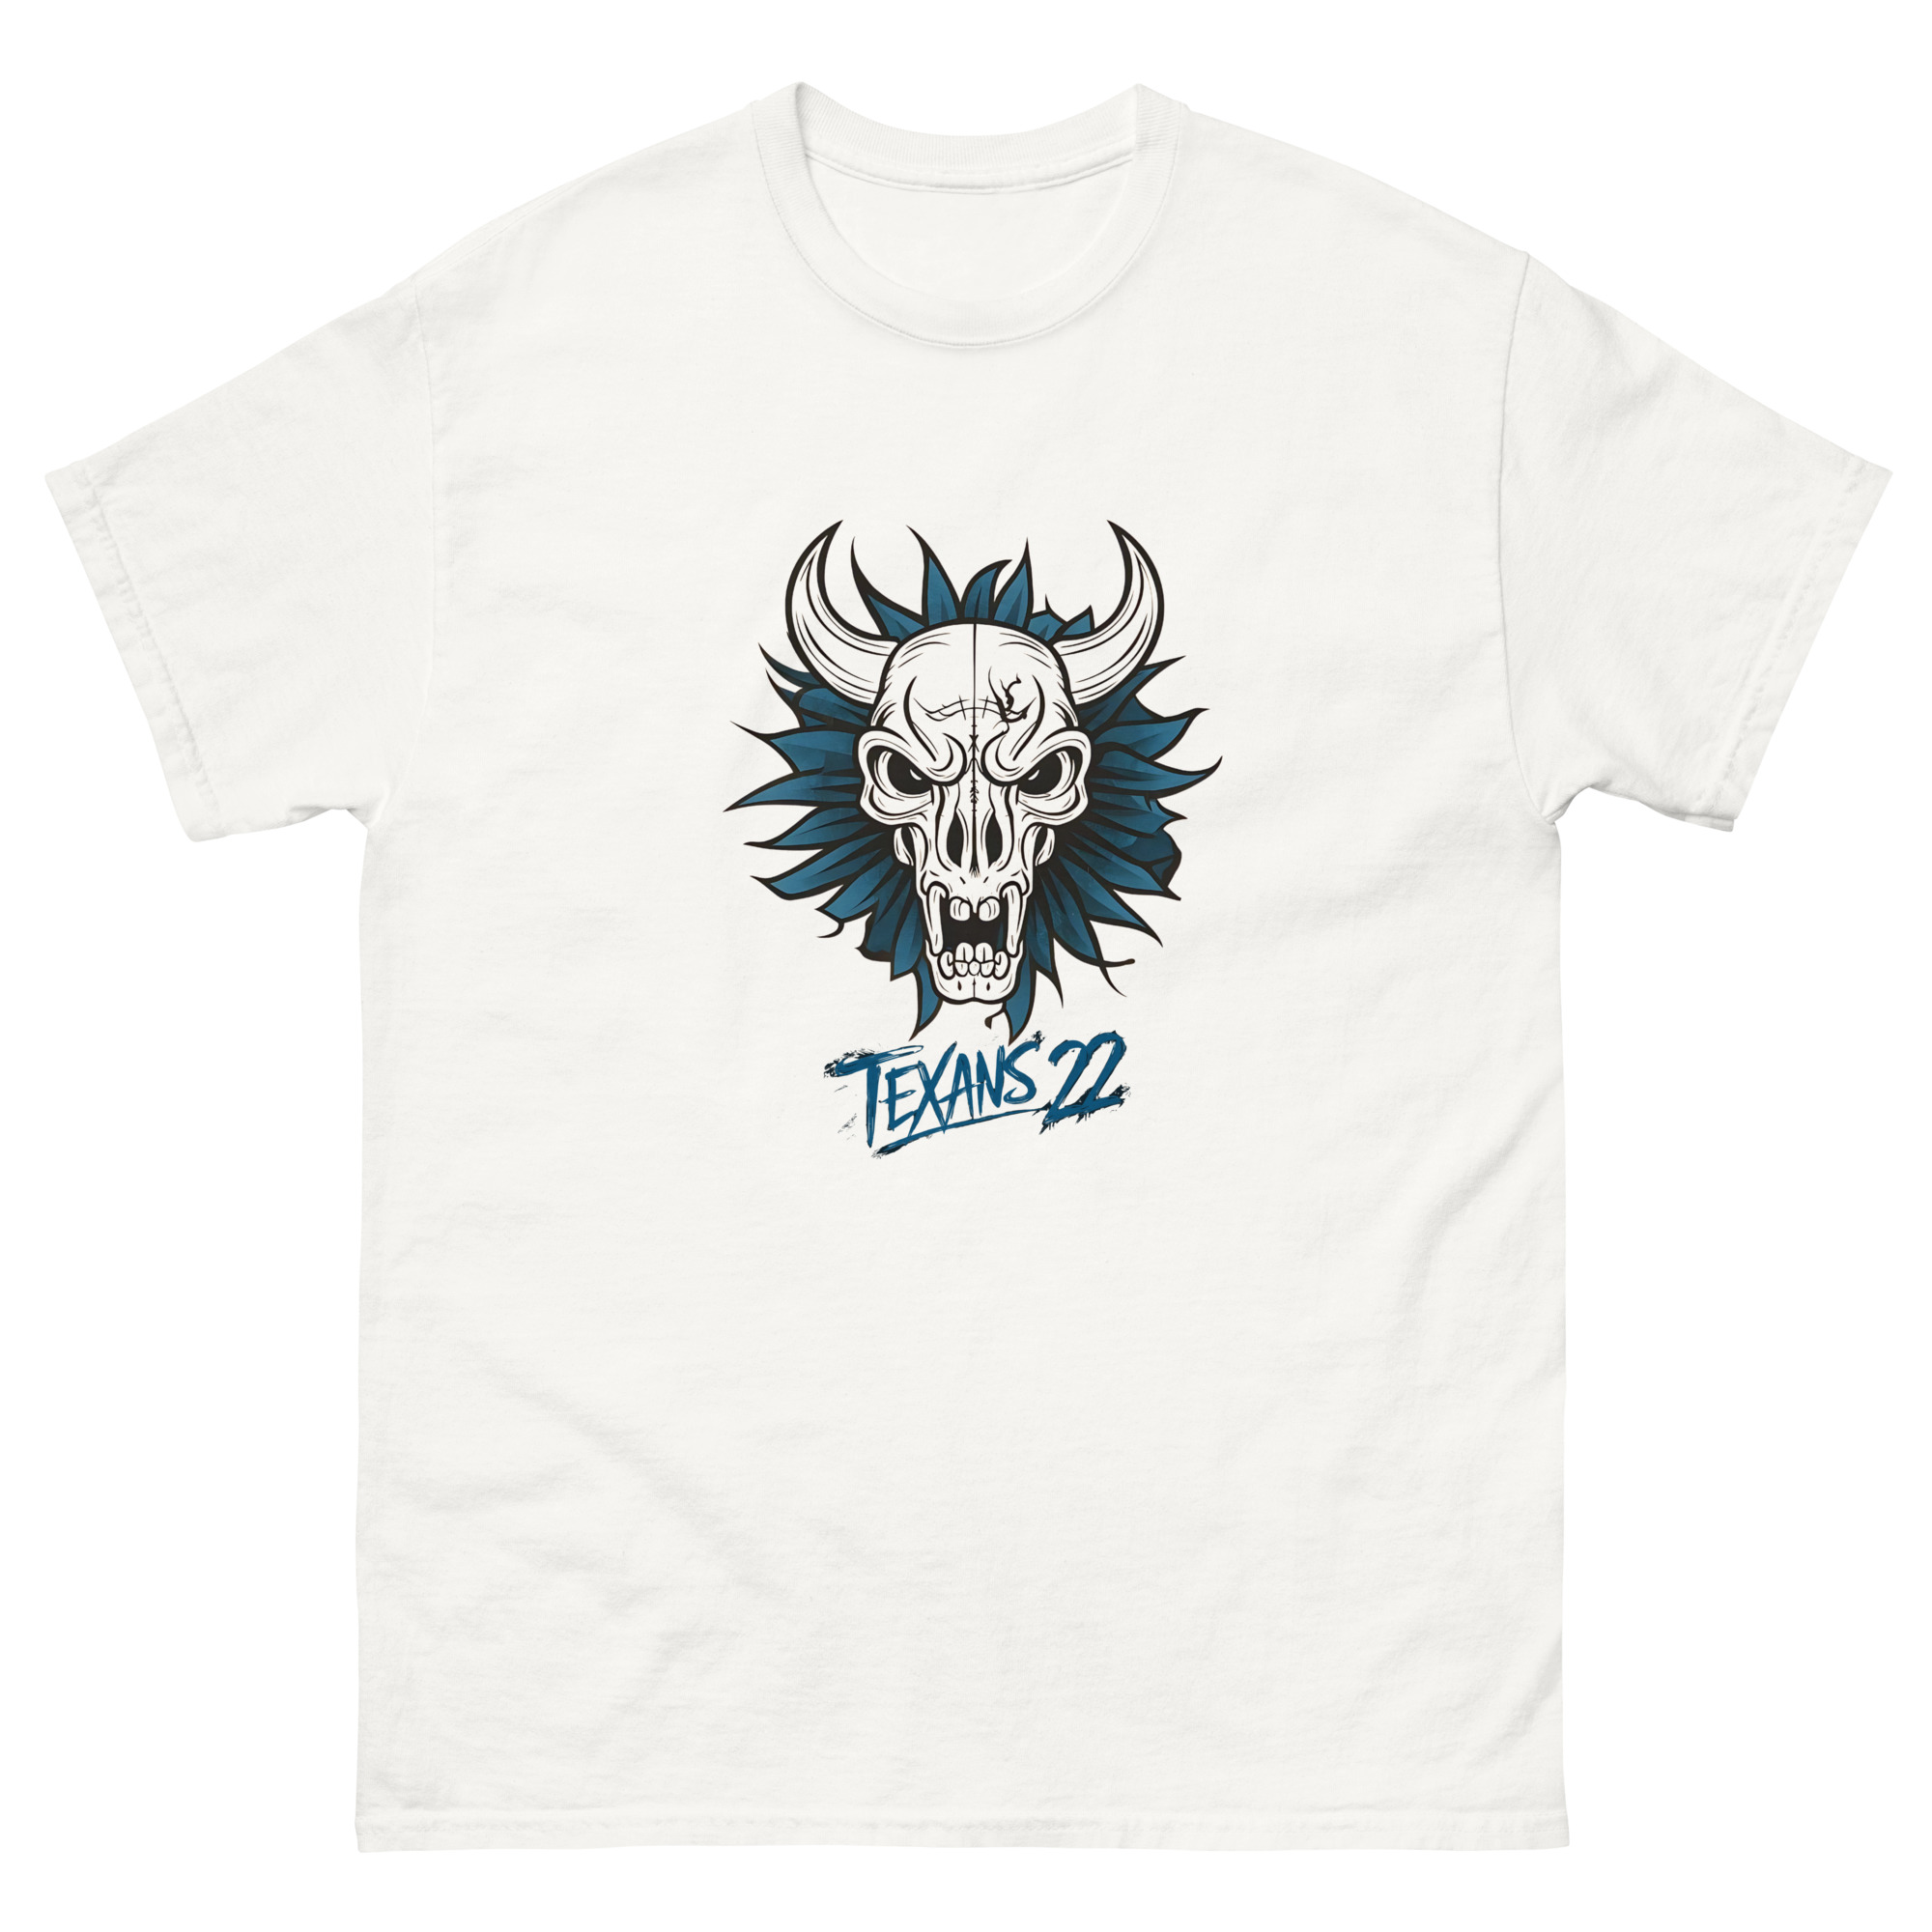 unisex-classic-tee-white-front-6666567152a55.jpg